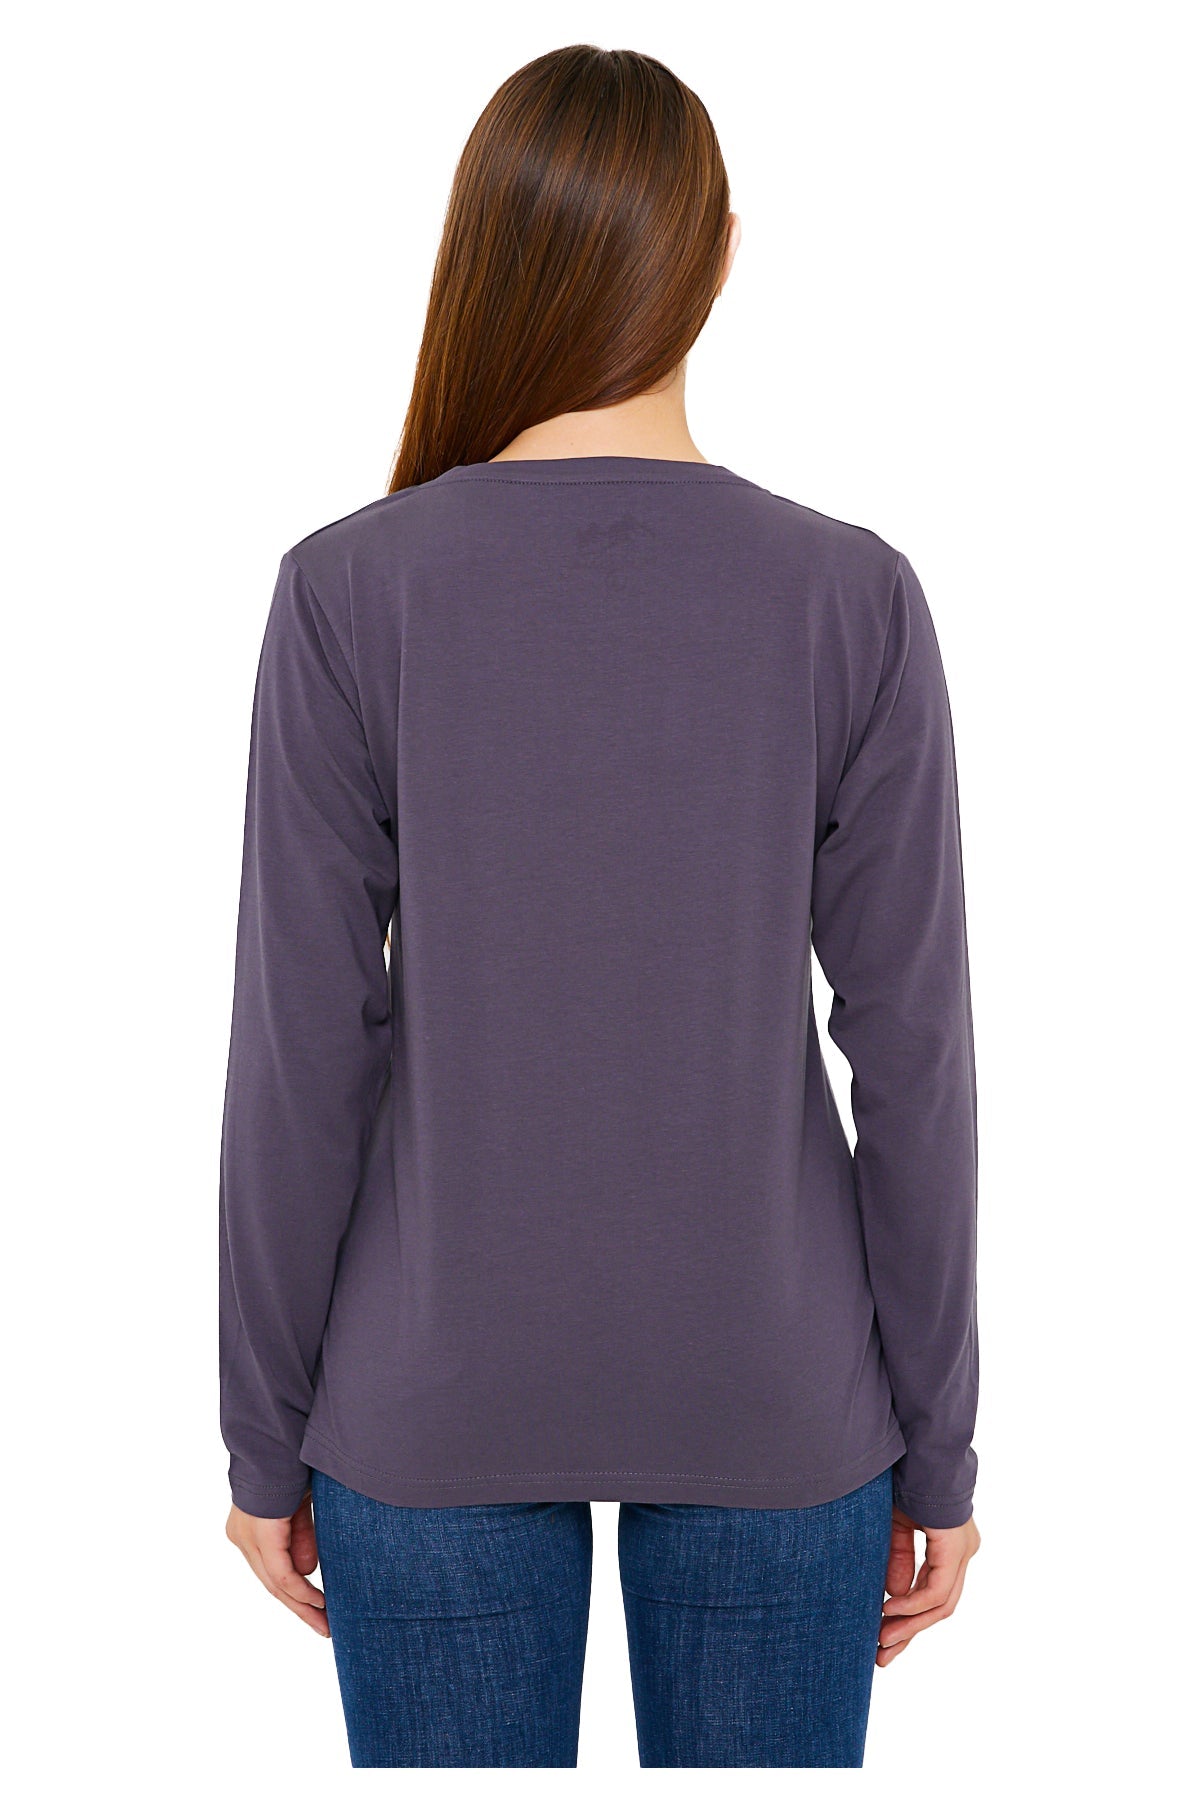 Long Sleeve V Neck T-Shirts for Women & Girls - Colorful Pima Cotton-139